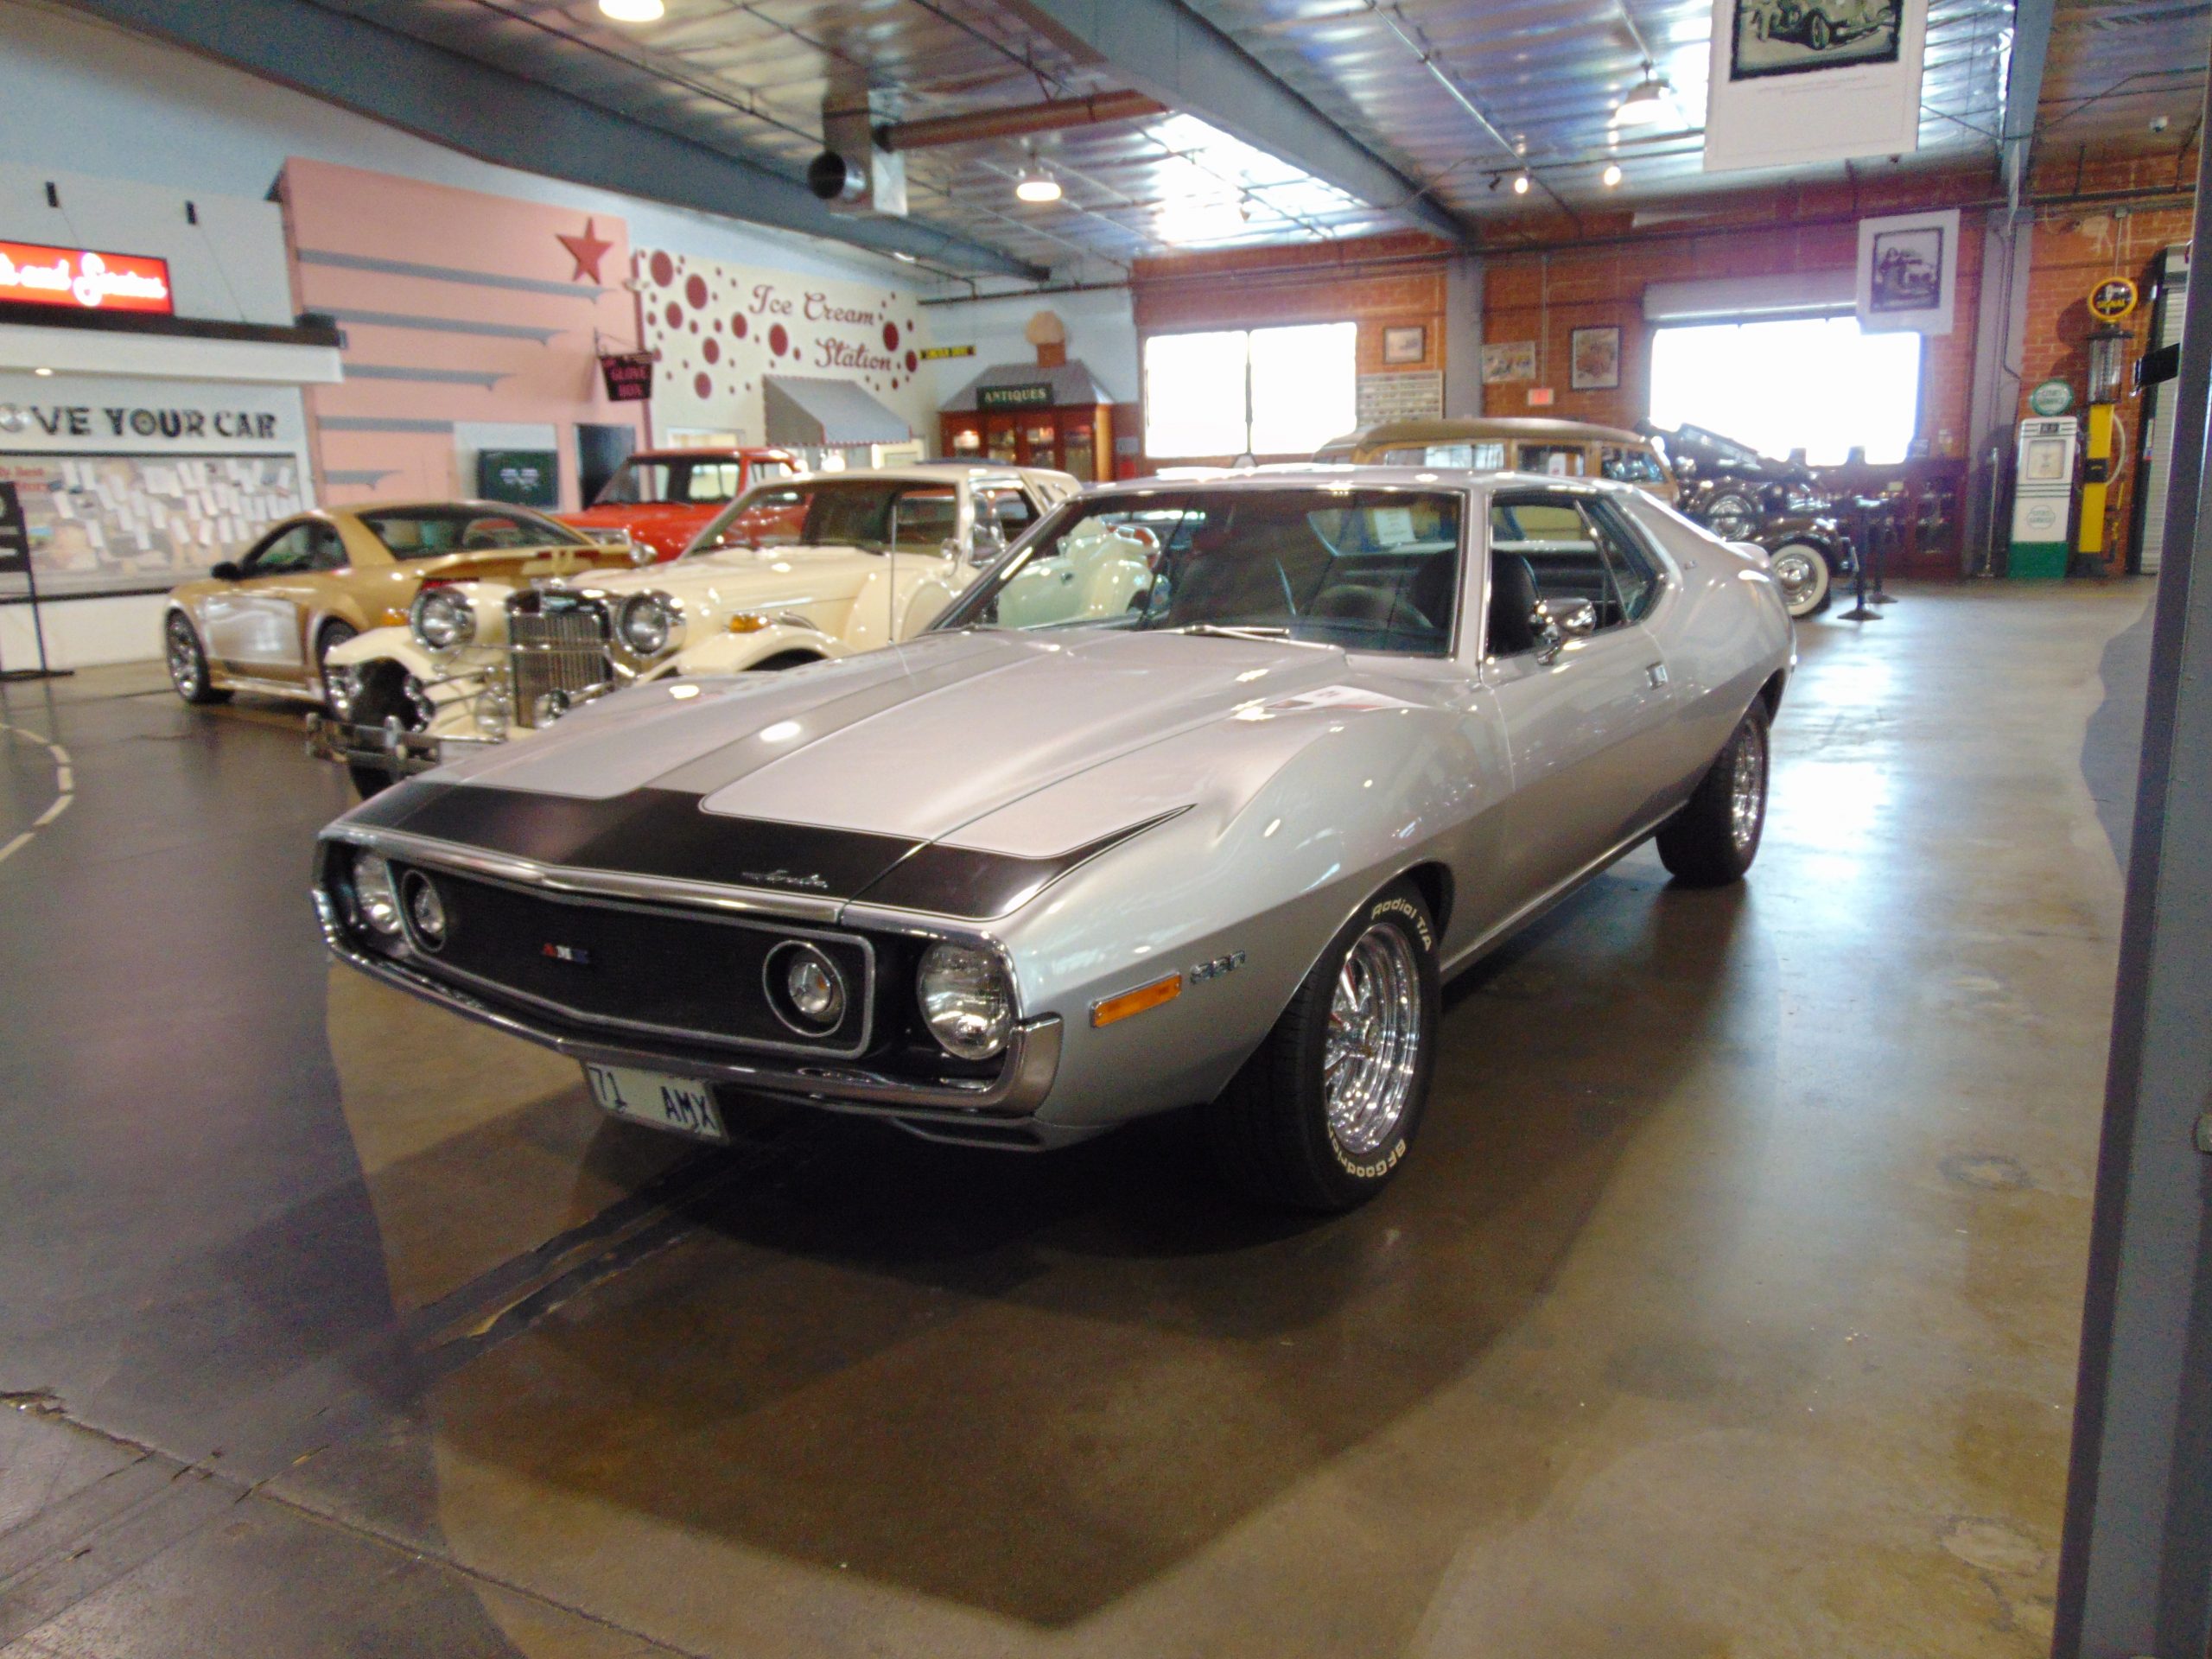 1971 AMX Javelin for rent